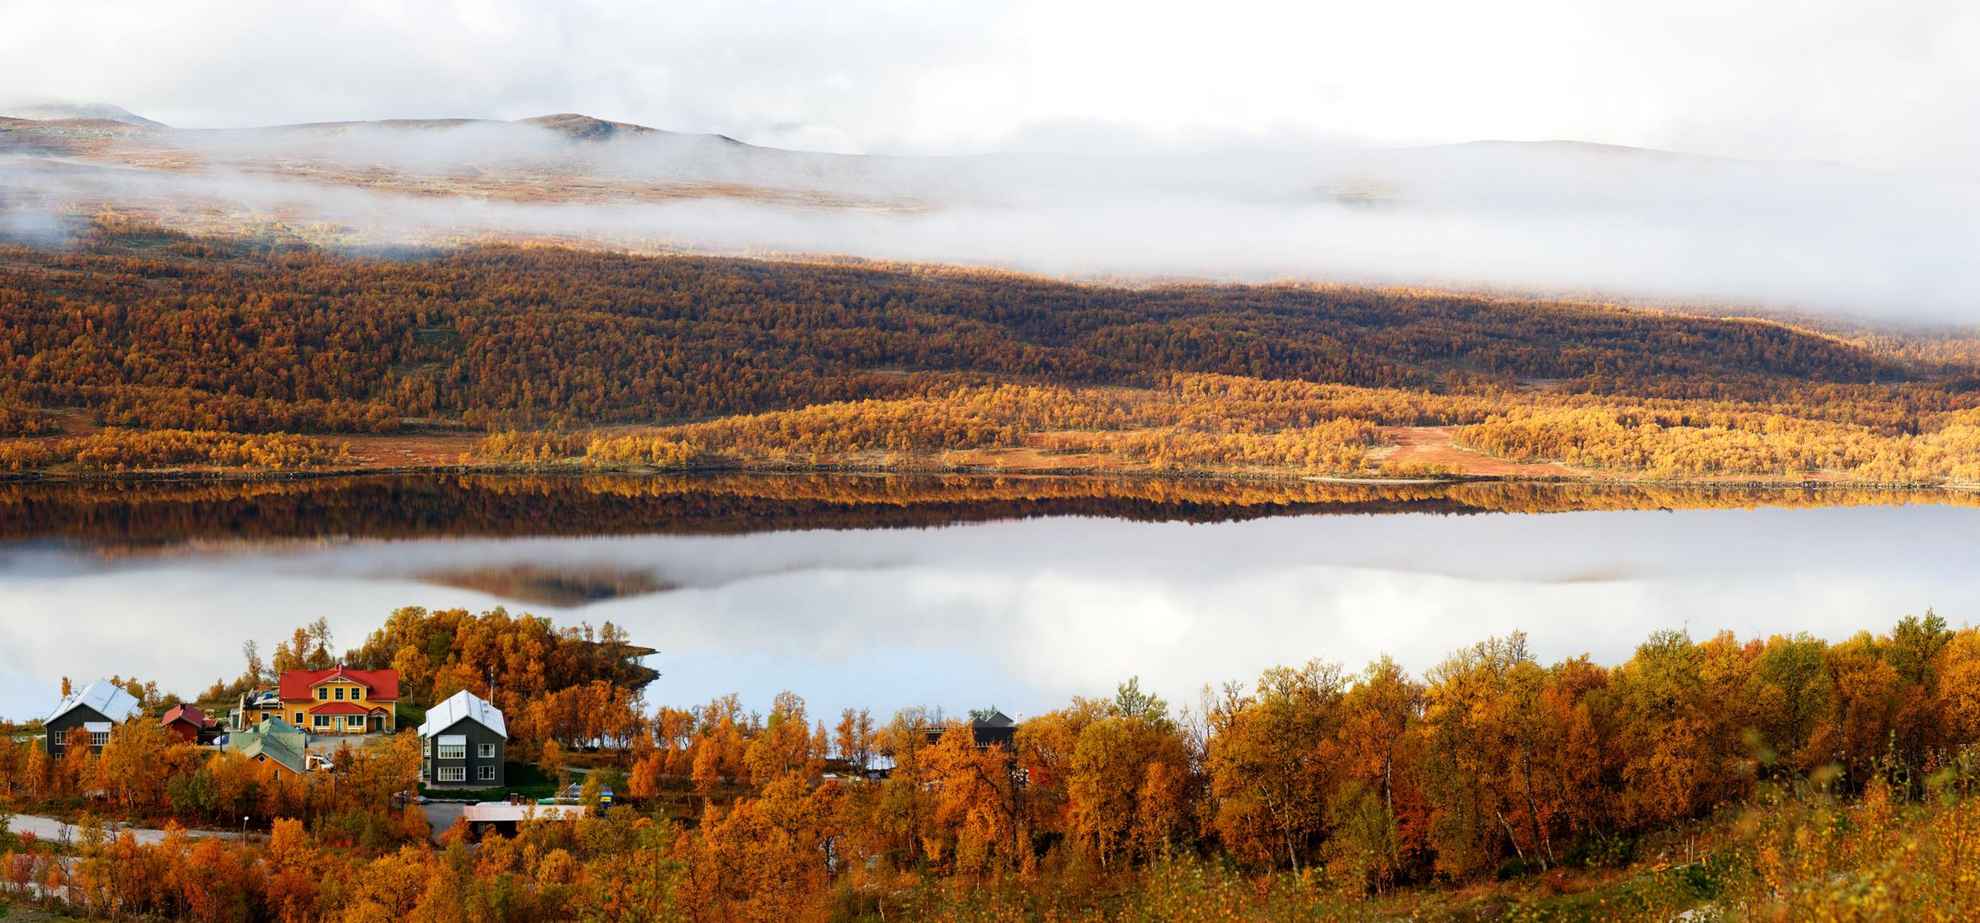 A beautiful autumn view of a hotel by a lake in the mountains. The trees are orange and there is a fog over the mountain on the other side of the lake.